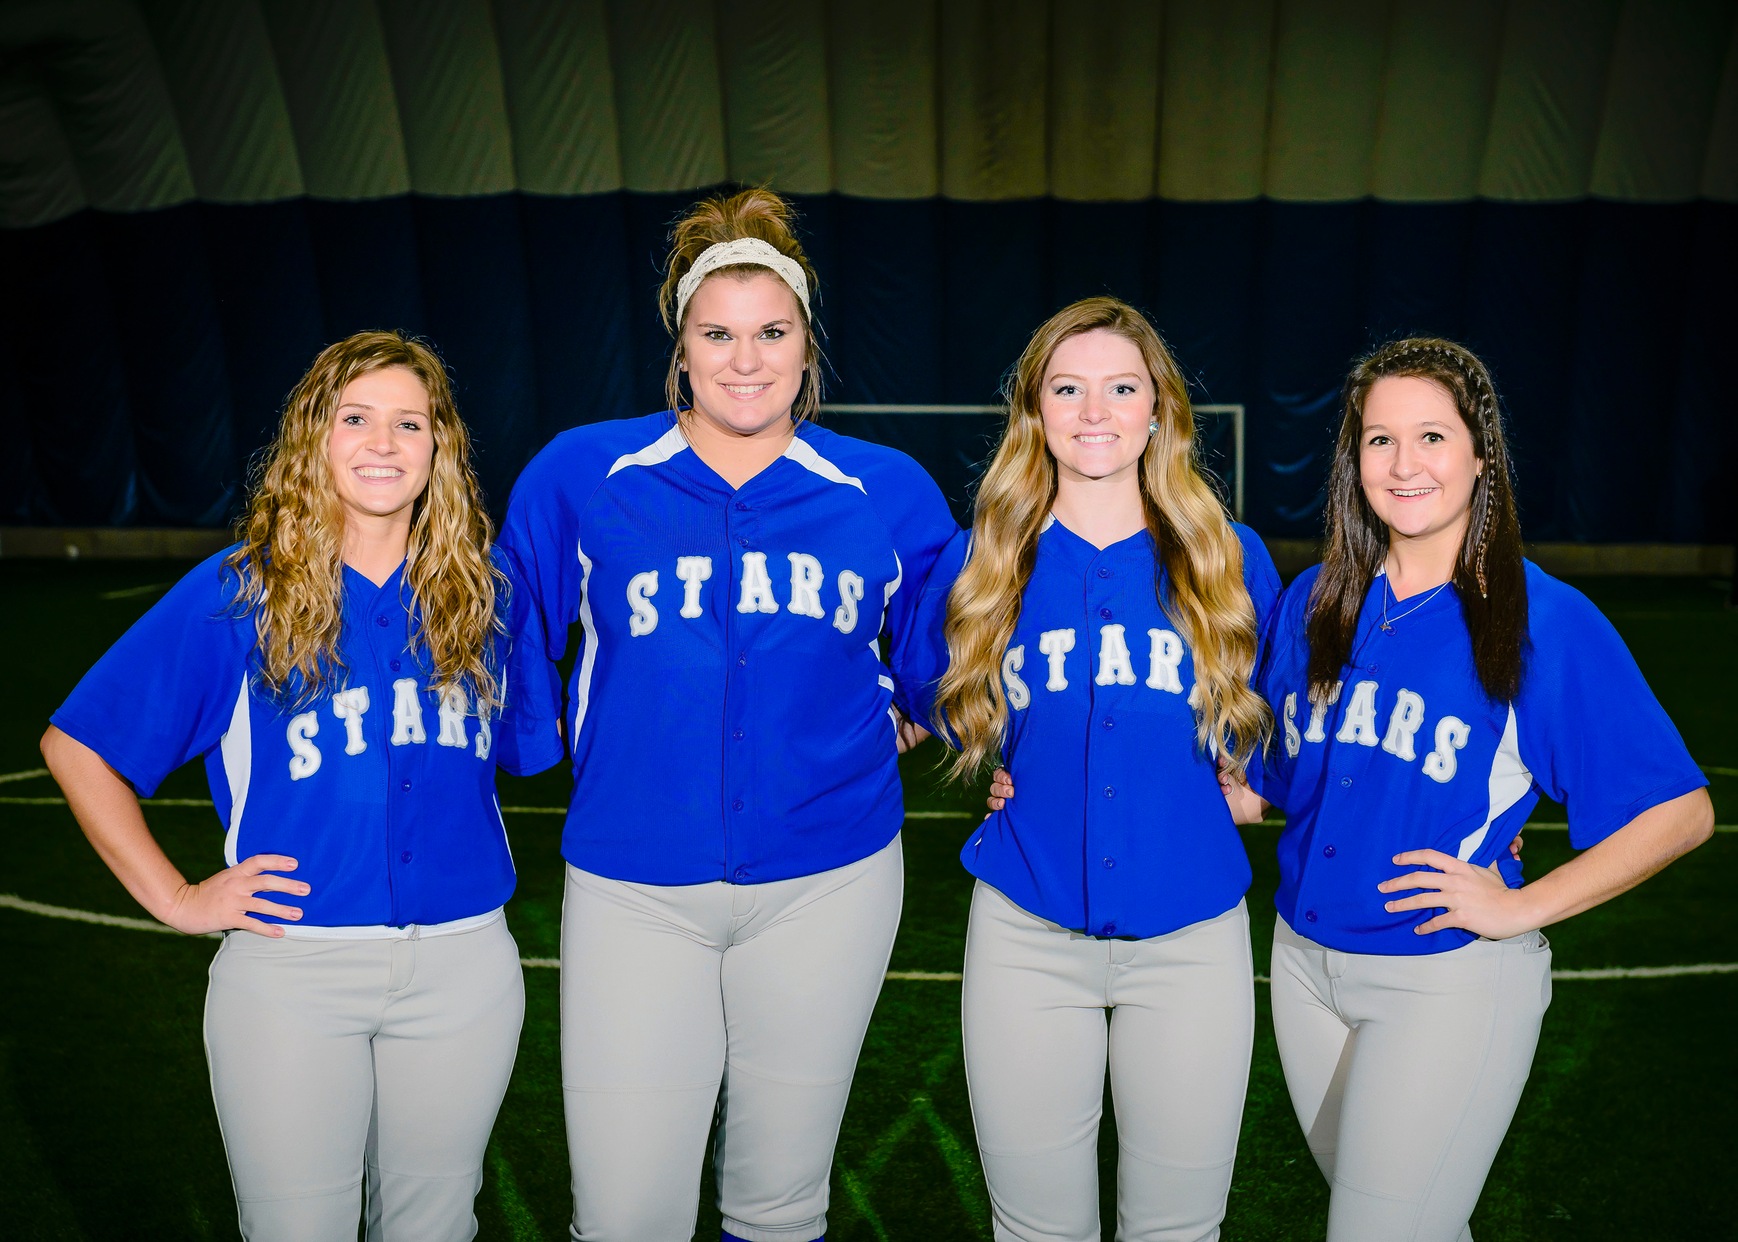 Softball team looks to build on strong ‘16